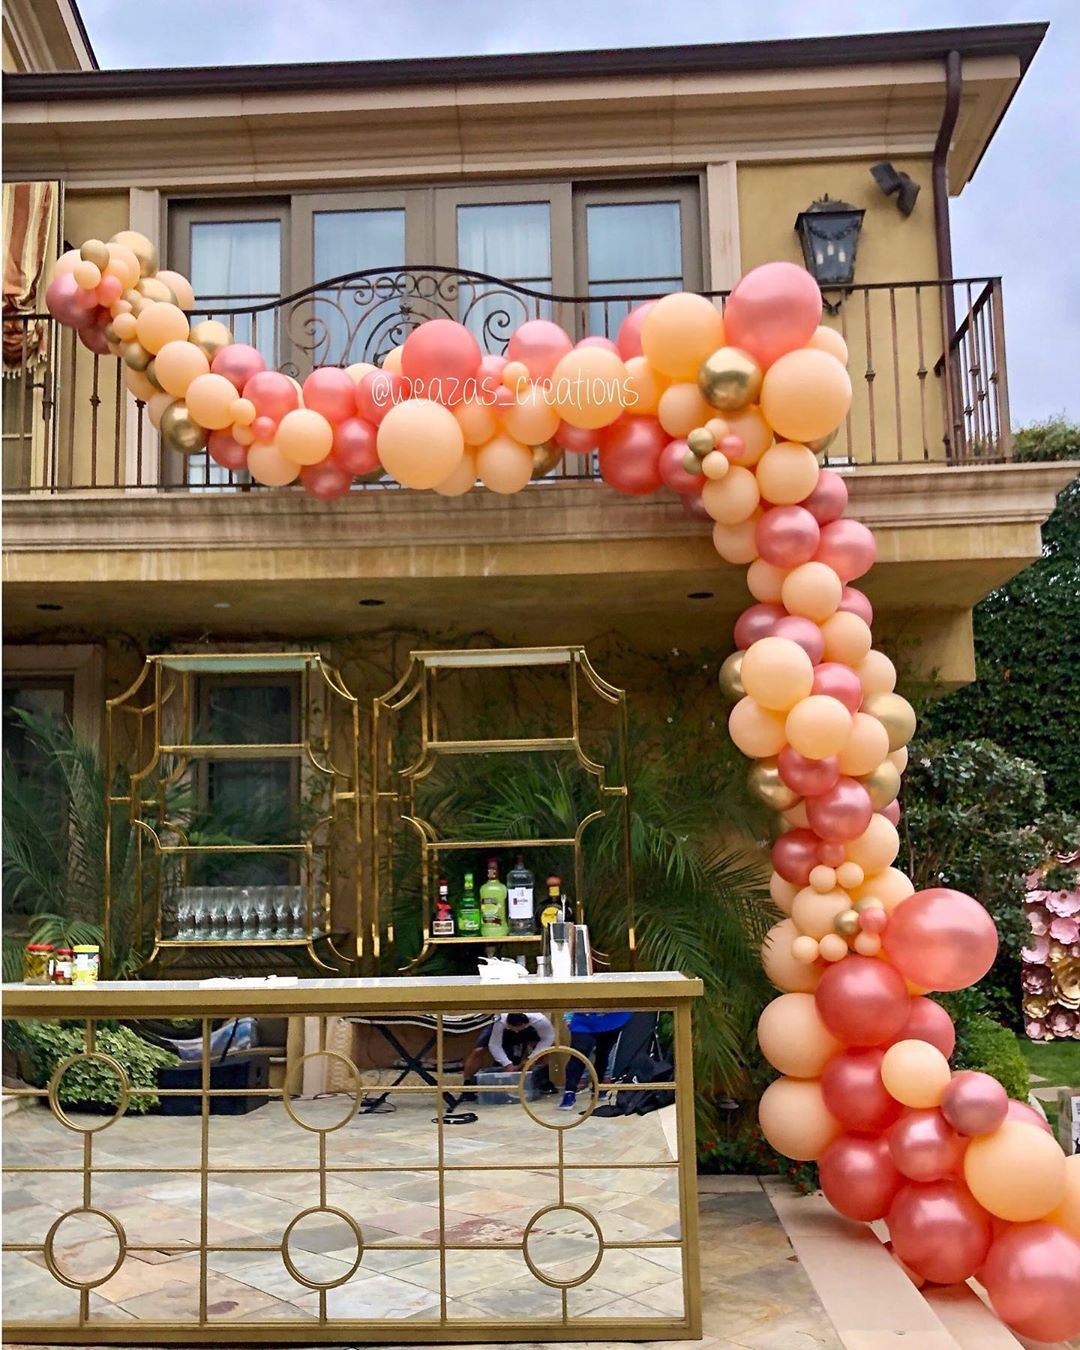 42 Best Graduation Party Ideas Guaranteed To Impress,graduation party ideas for daughter,graduation party ideas for guys,graduation party ideas 2020